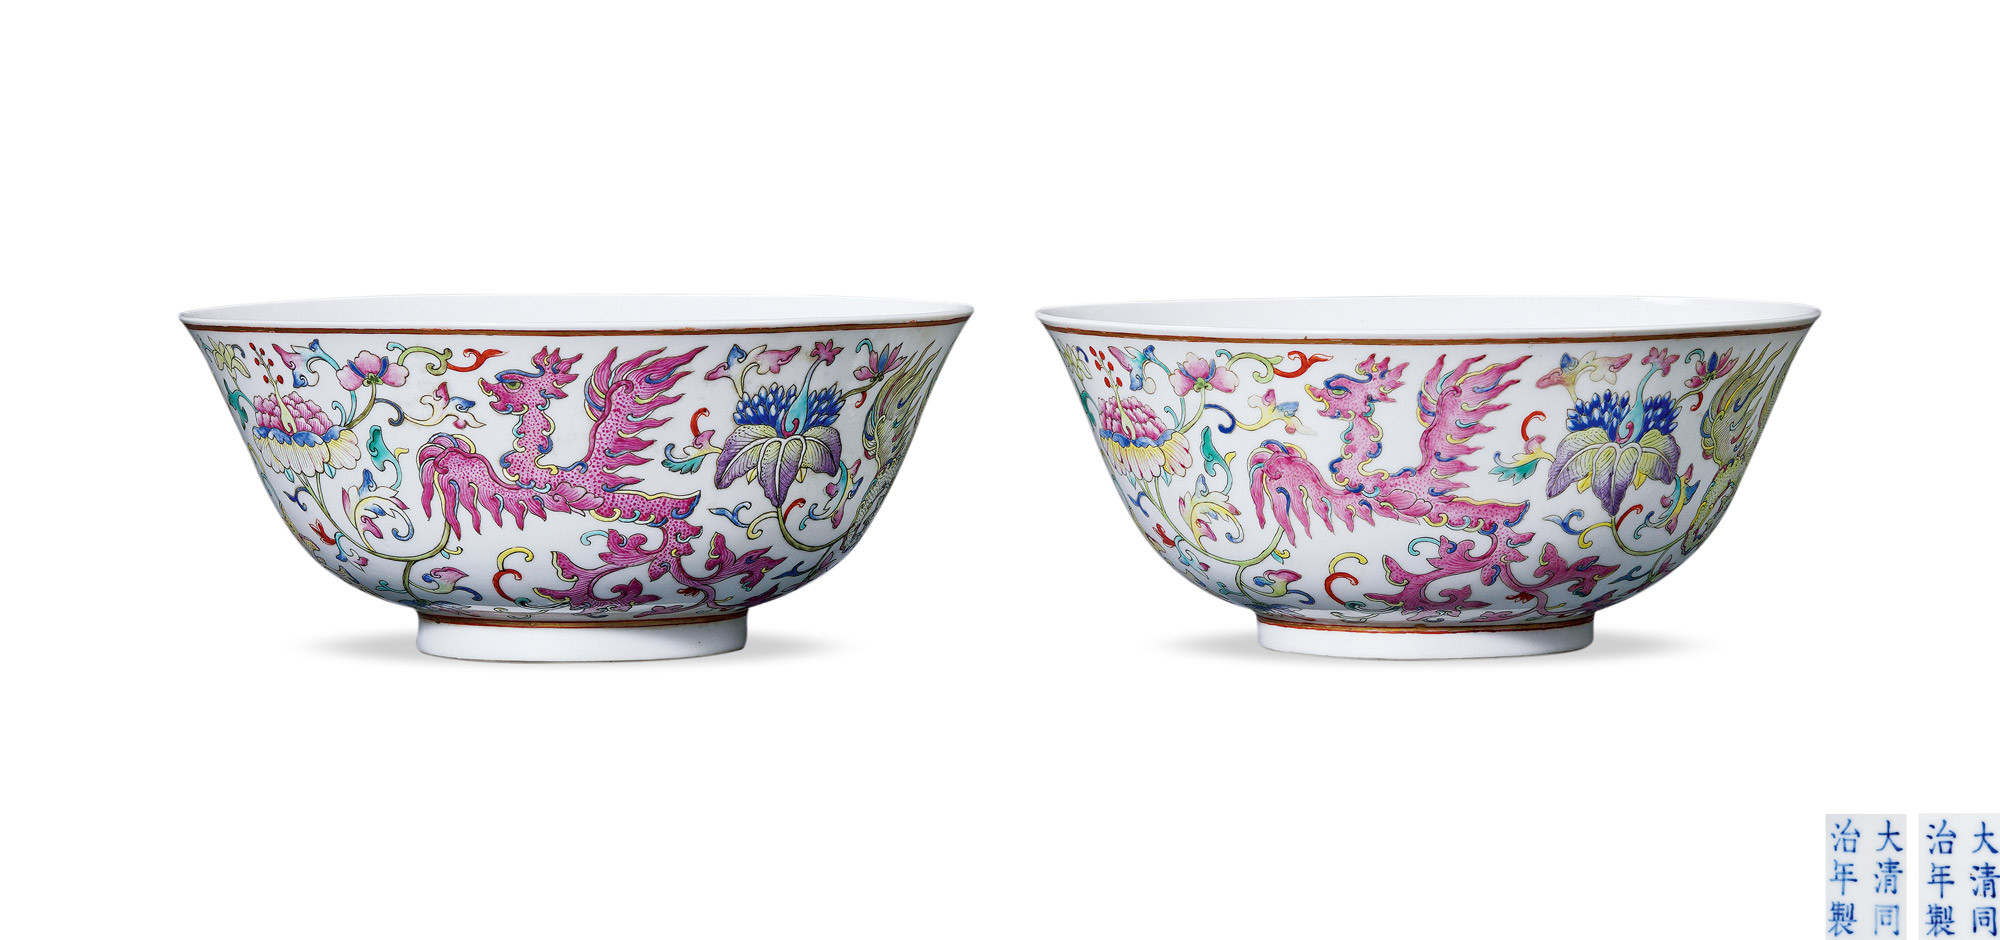 A PAIR OF FAMILLE-ROSE BOWL WITH MYSTICAL BEASTS DESIGN